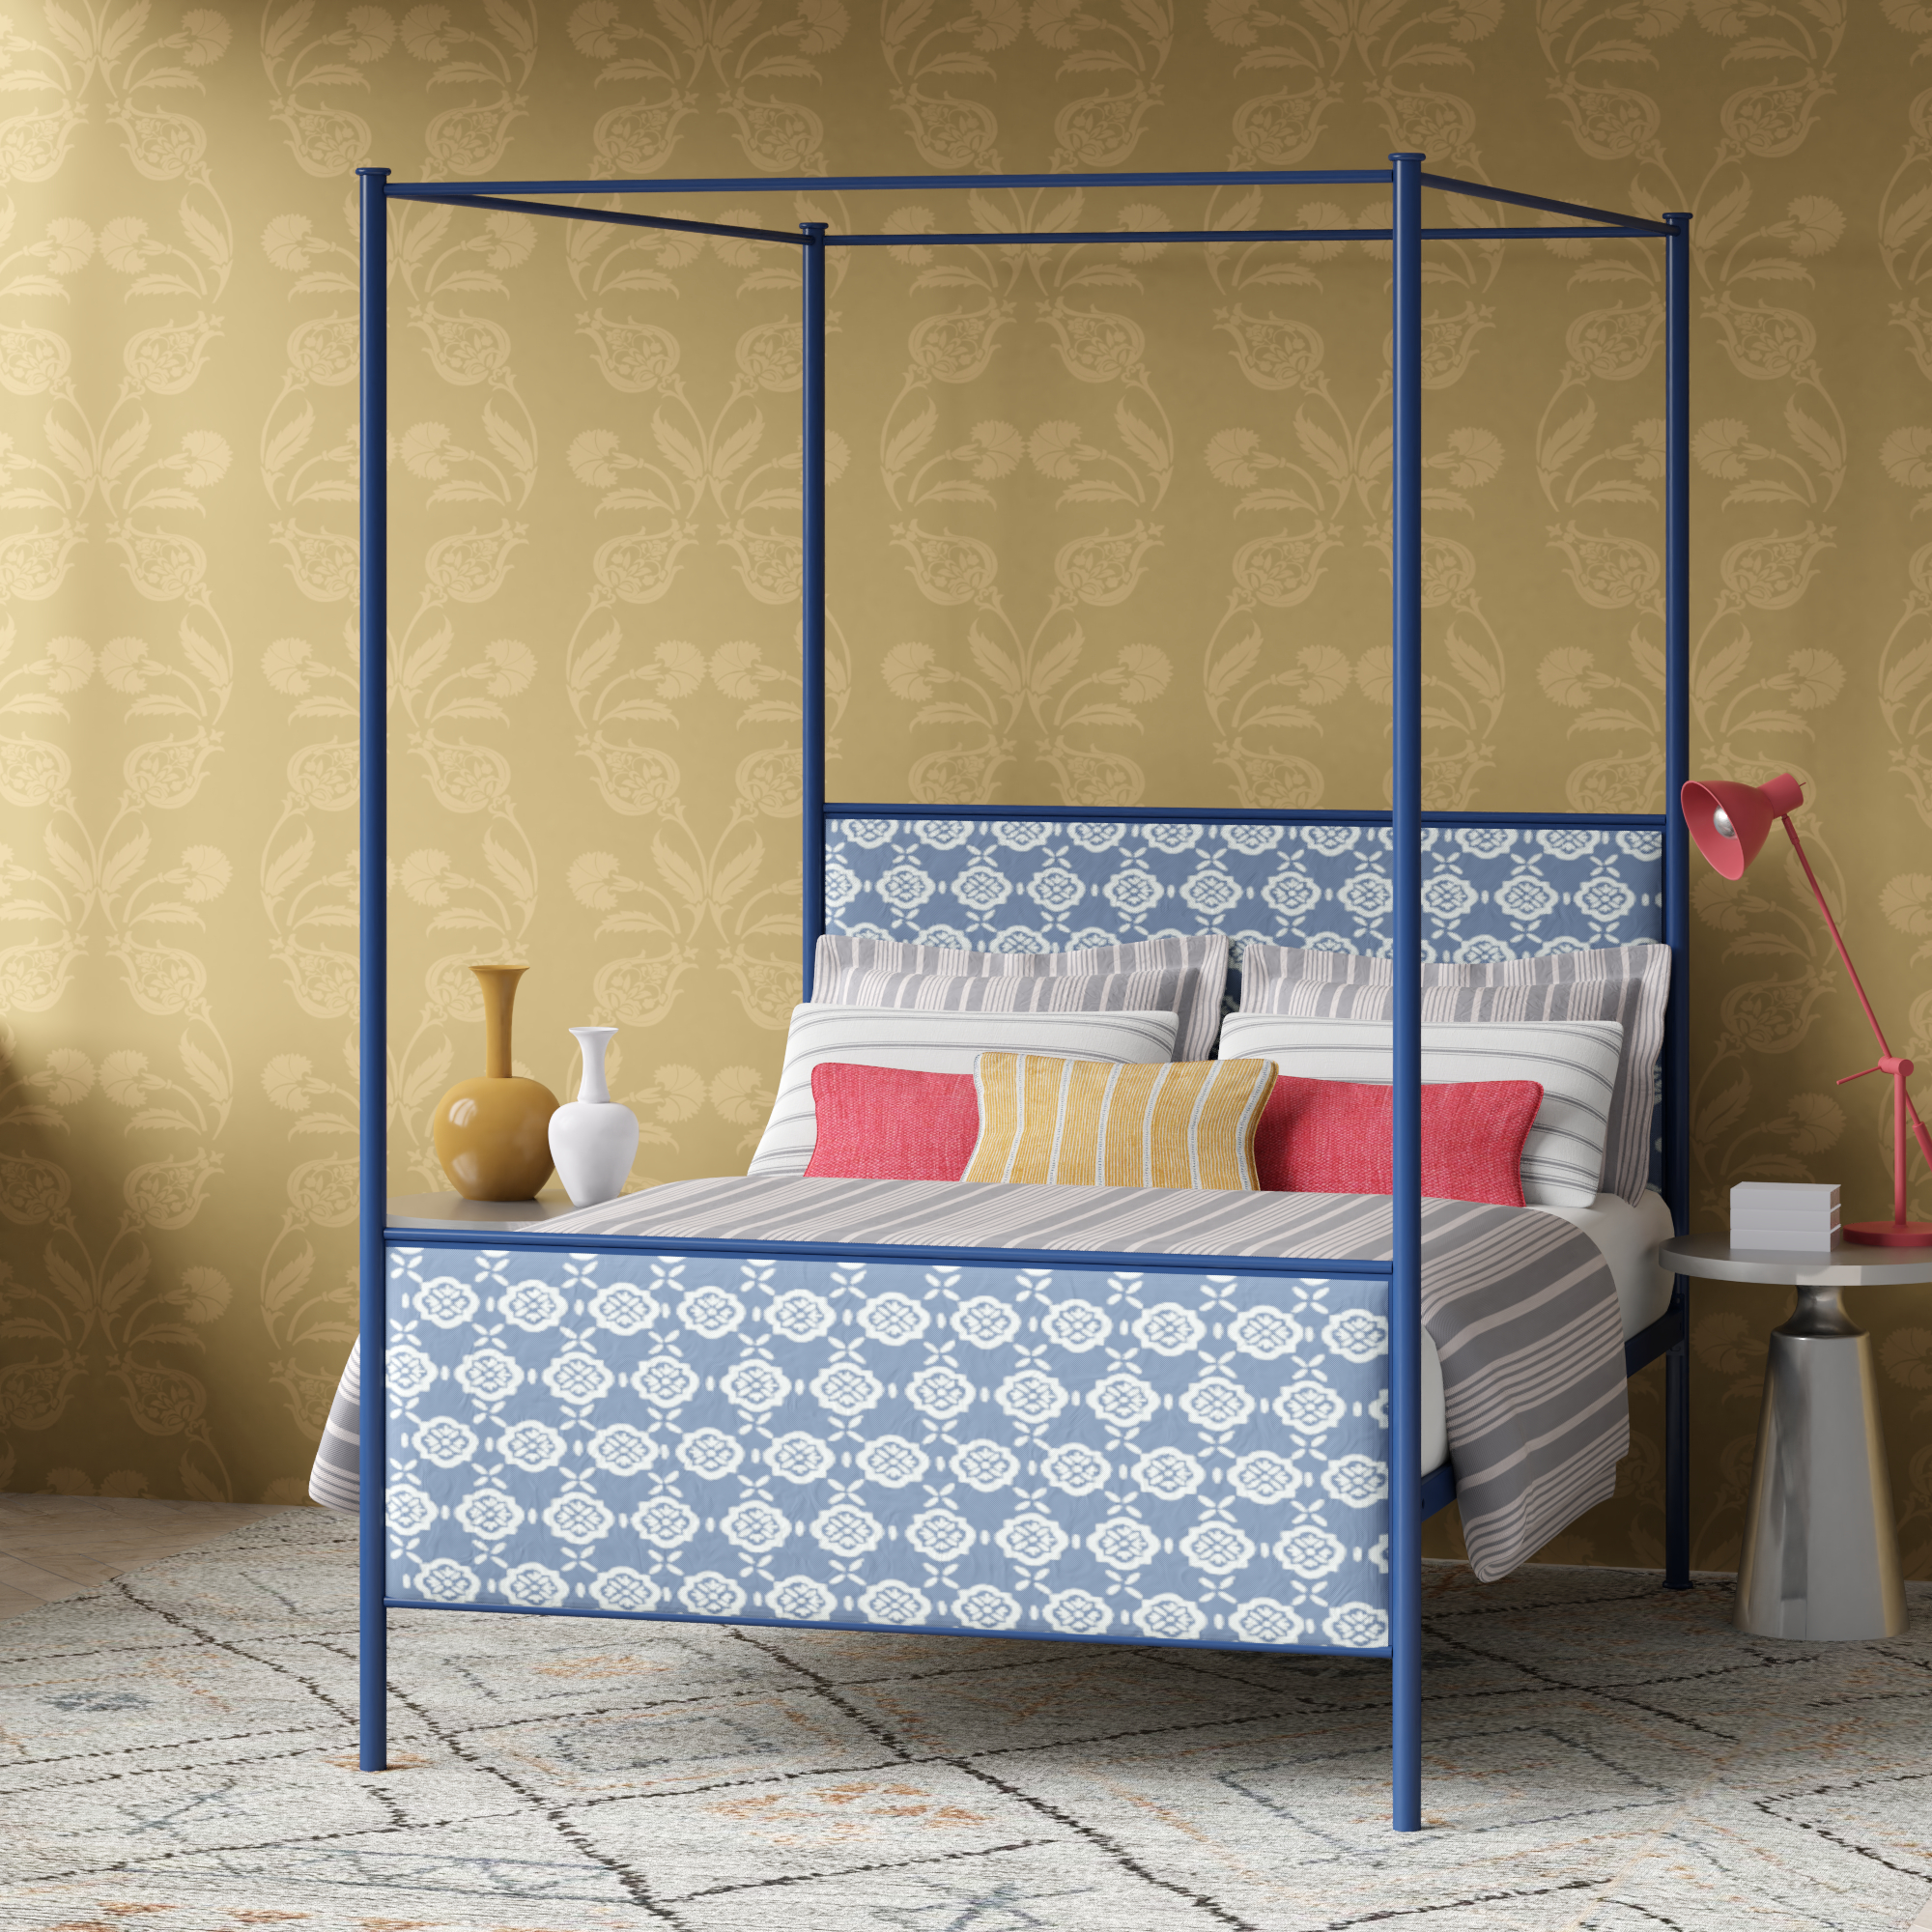 Reims metal bed - Image blue yellow